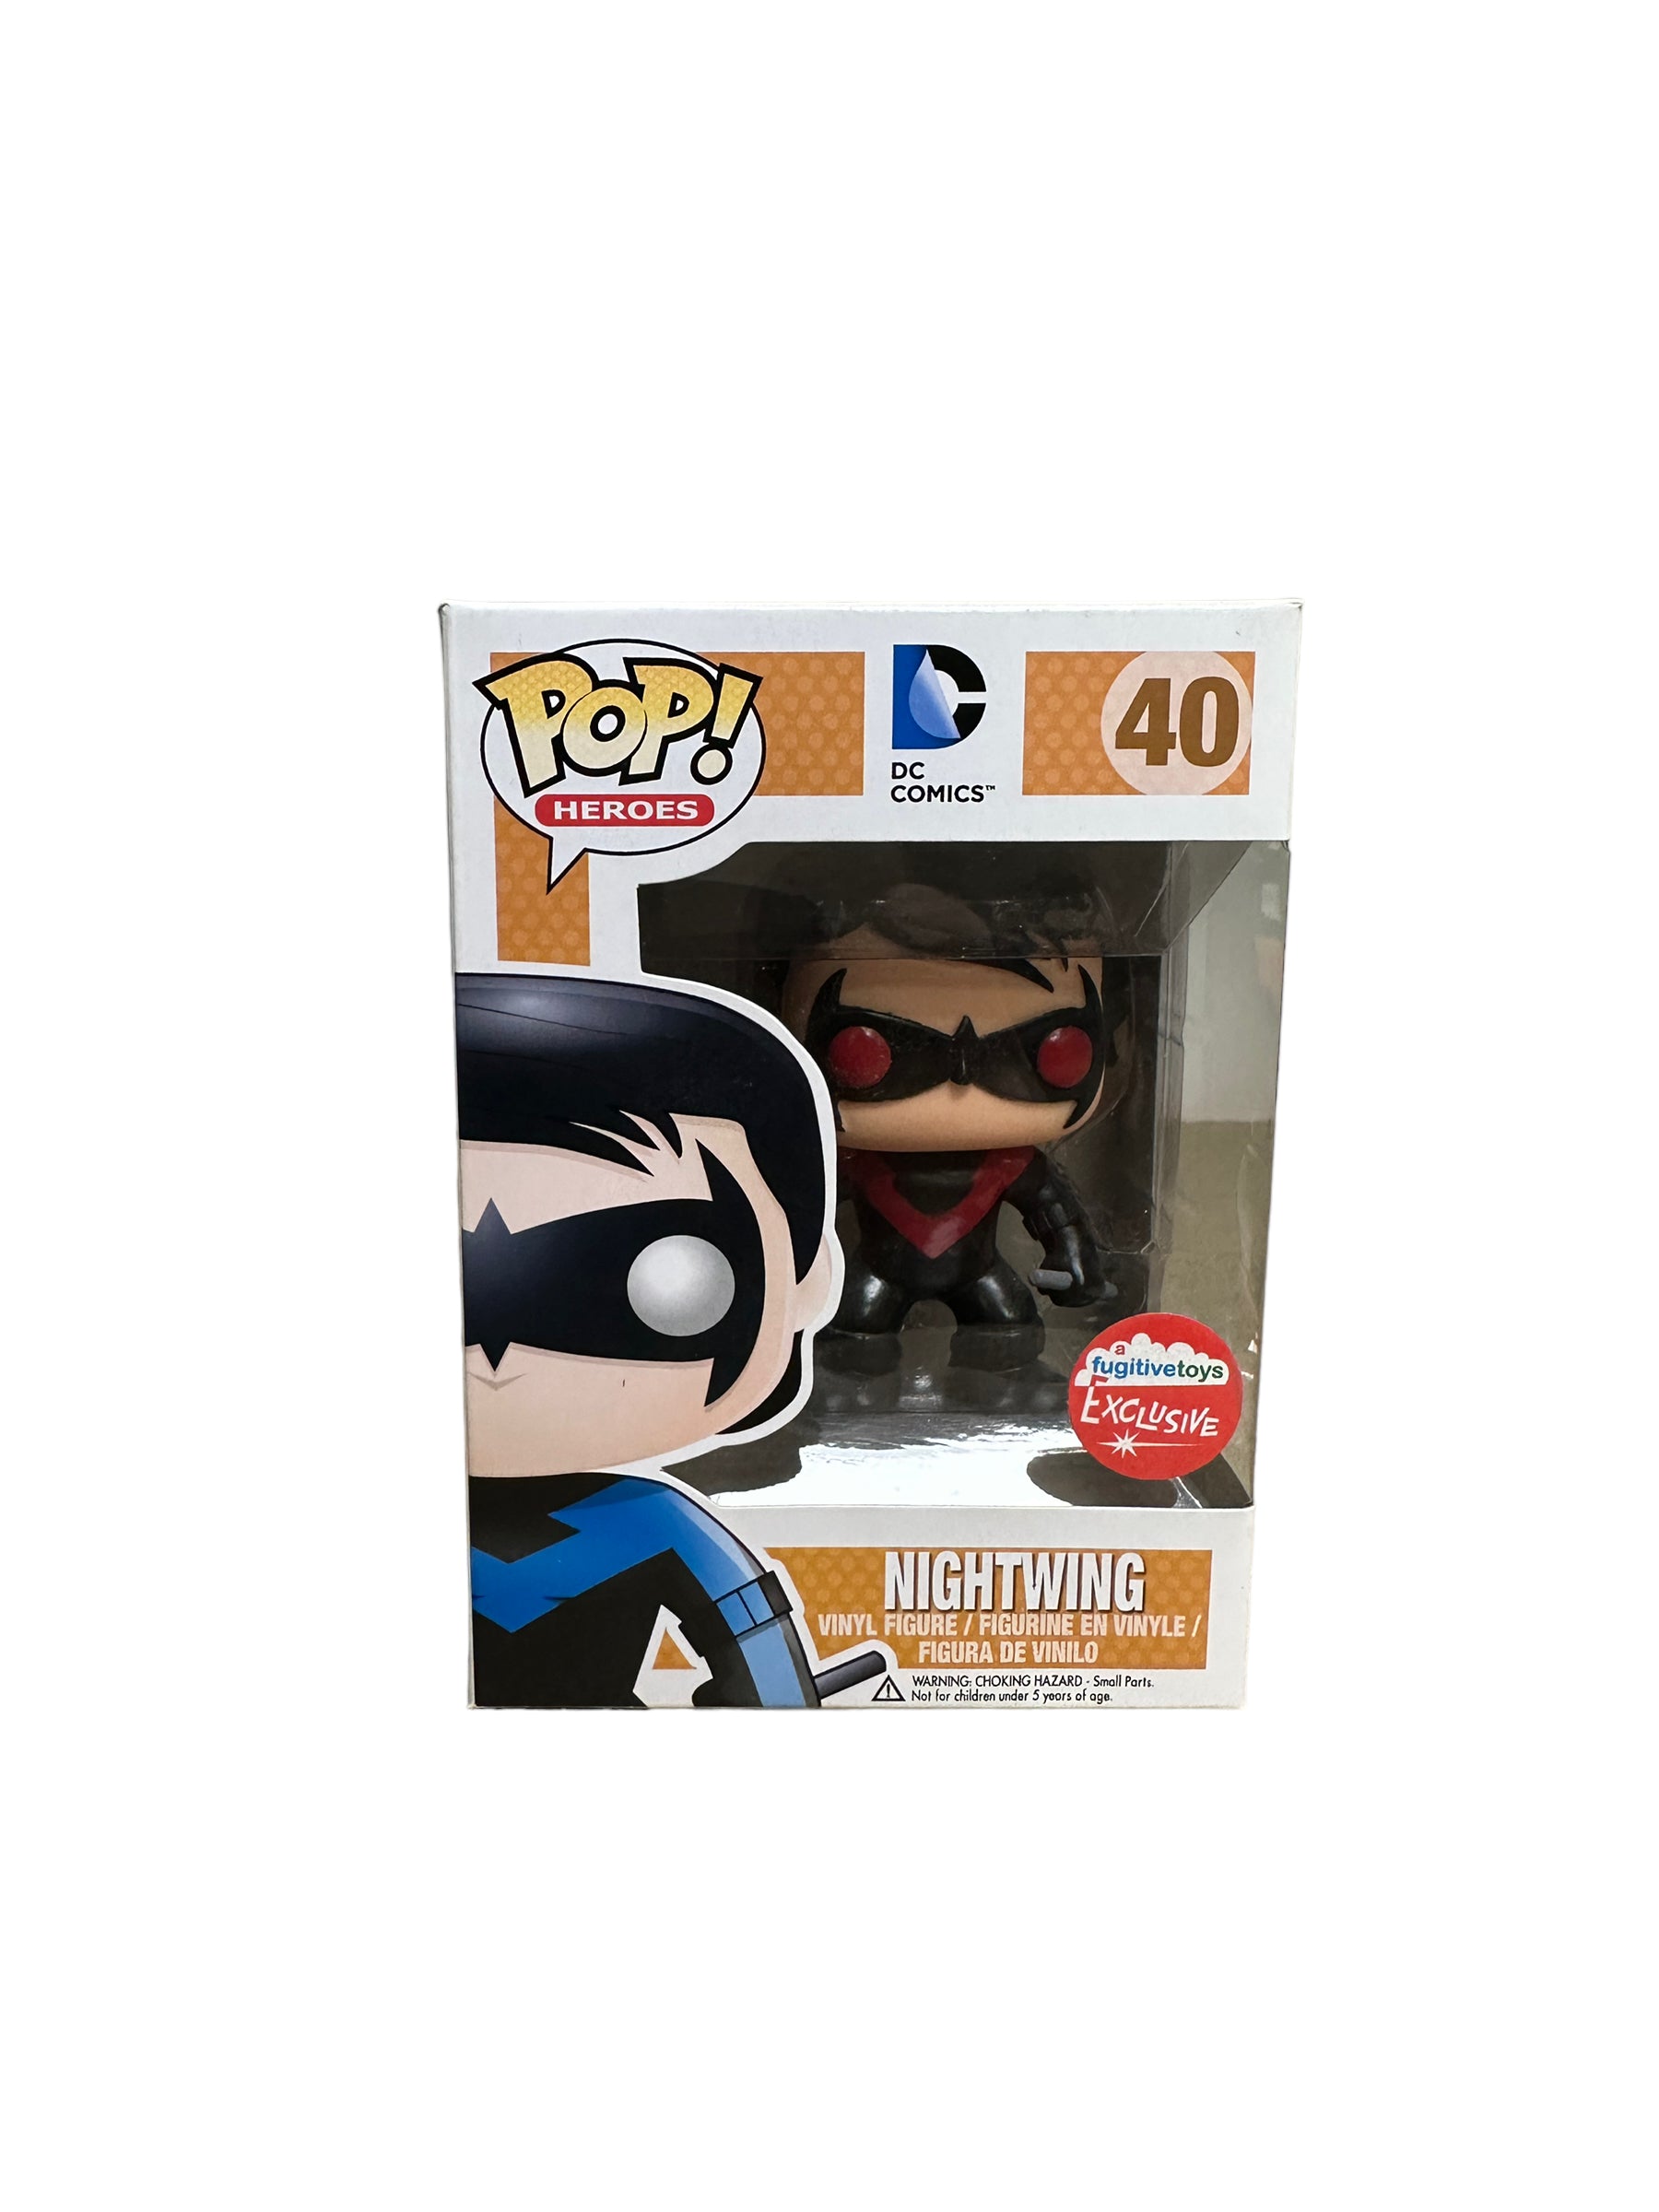 Nightwing #40 (Red) Funko Pop! - DC Comics - Fugitive Toys Exclusive - Condition 8/10